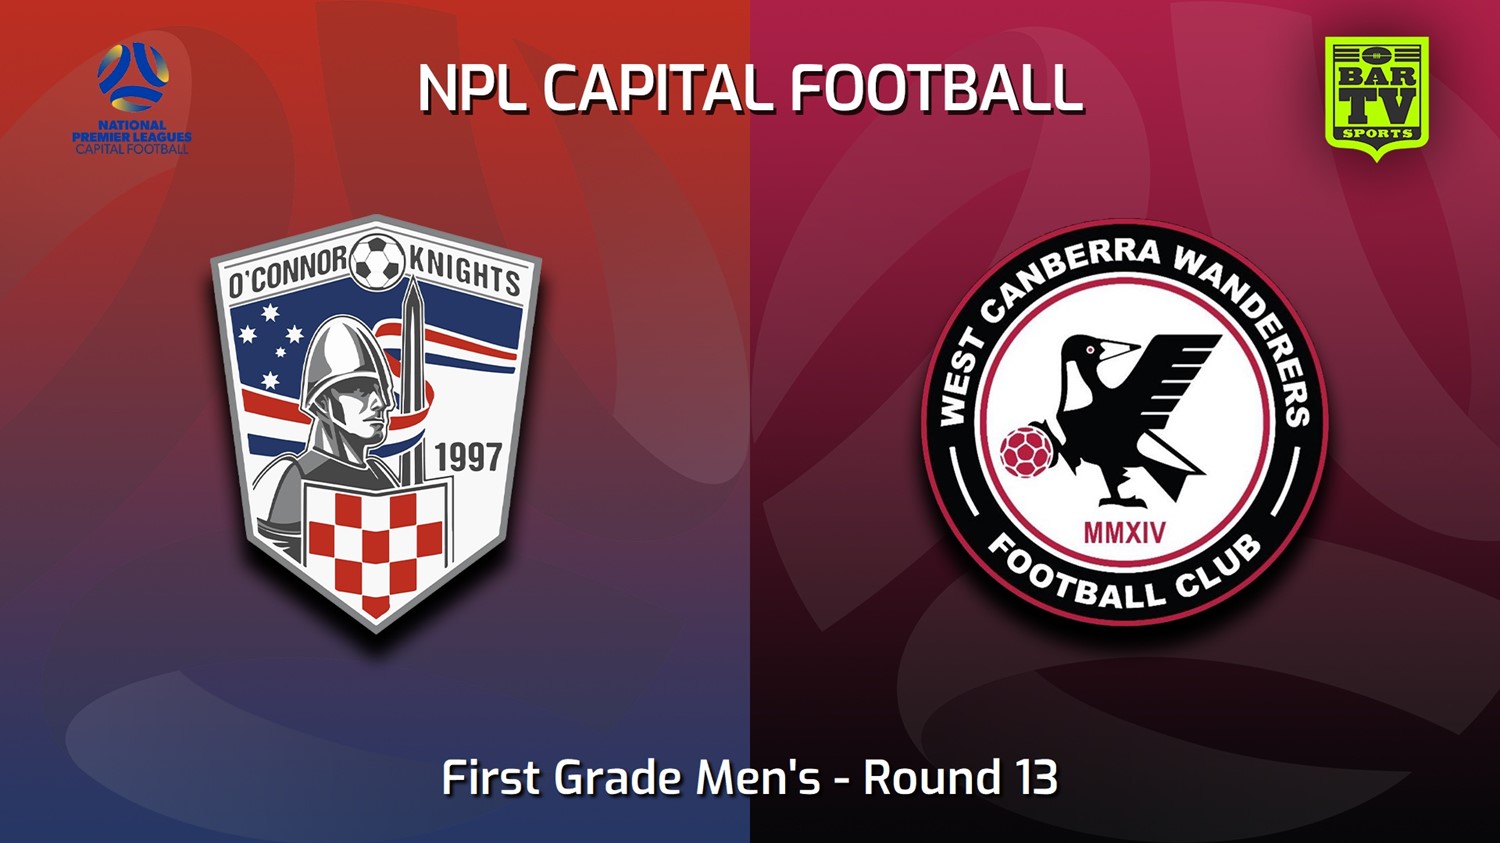 230701-Capital NPL Round 13 - O'Connor Knights SC v West Canberra Wanderers Minigame Slate Image